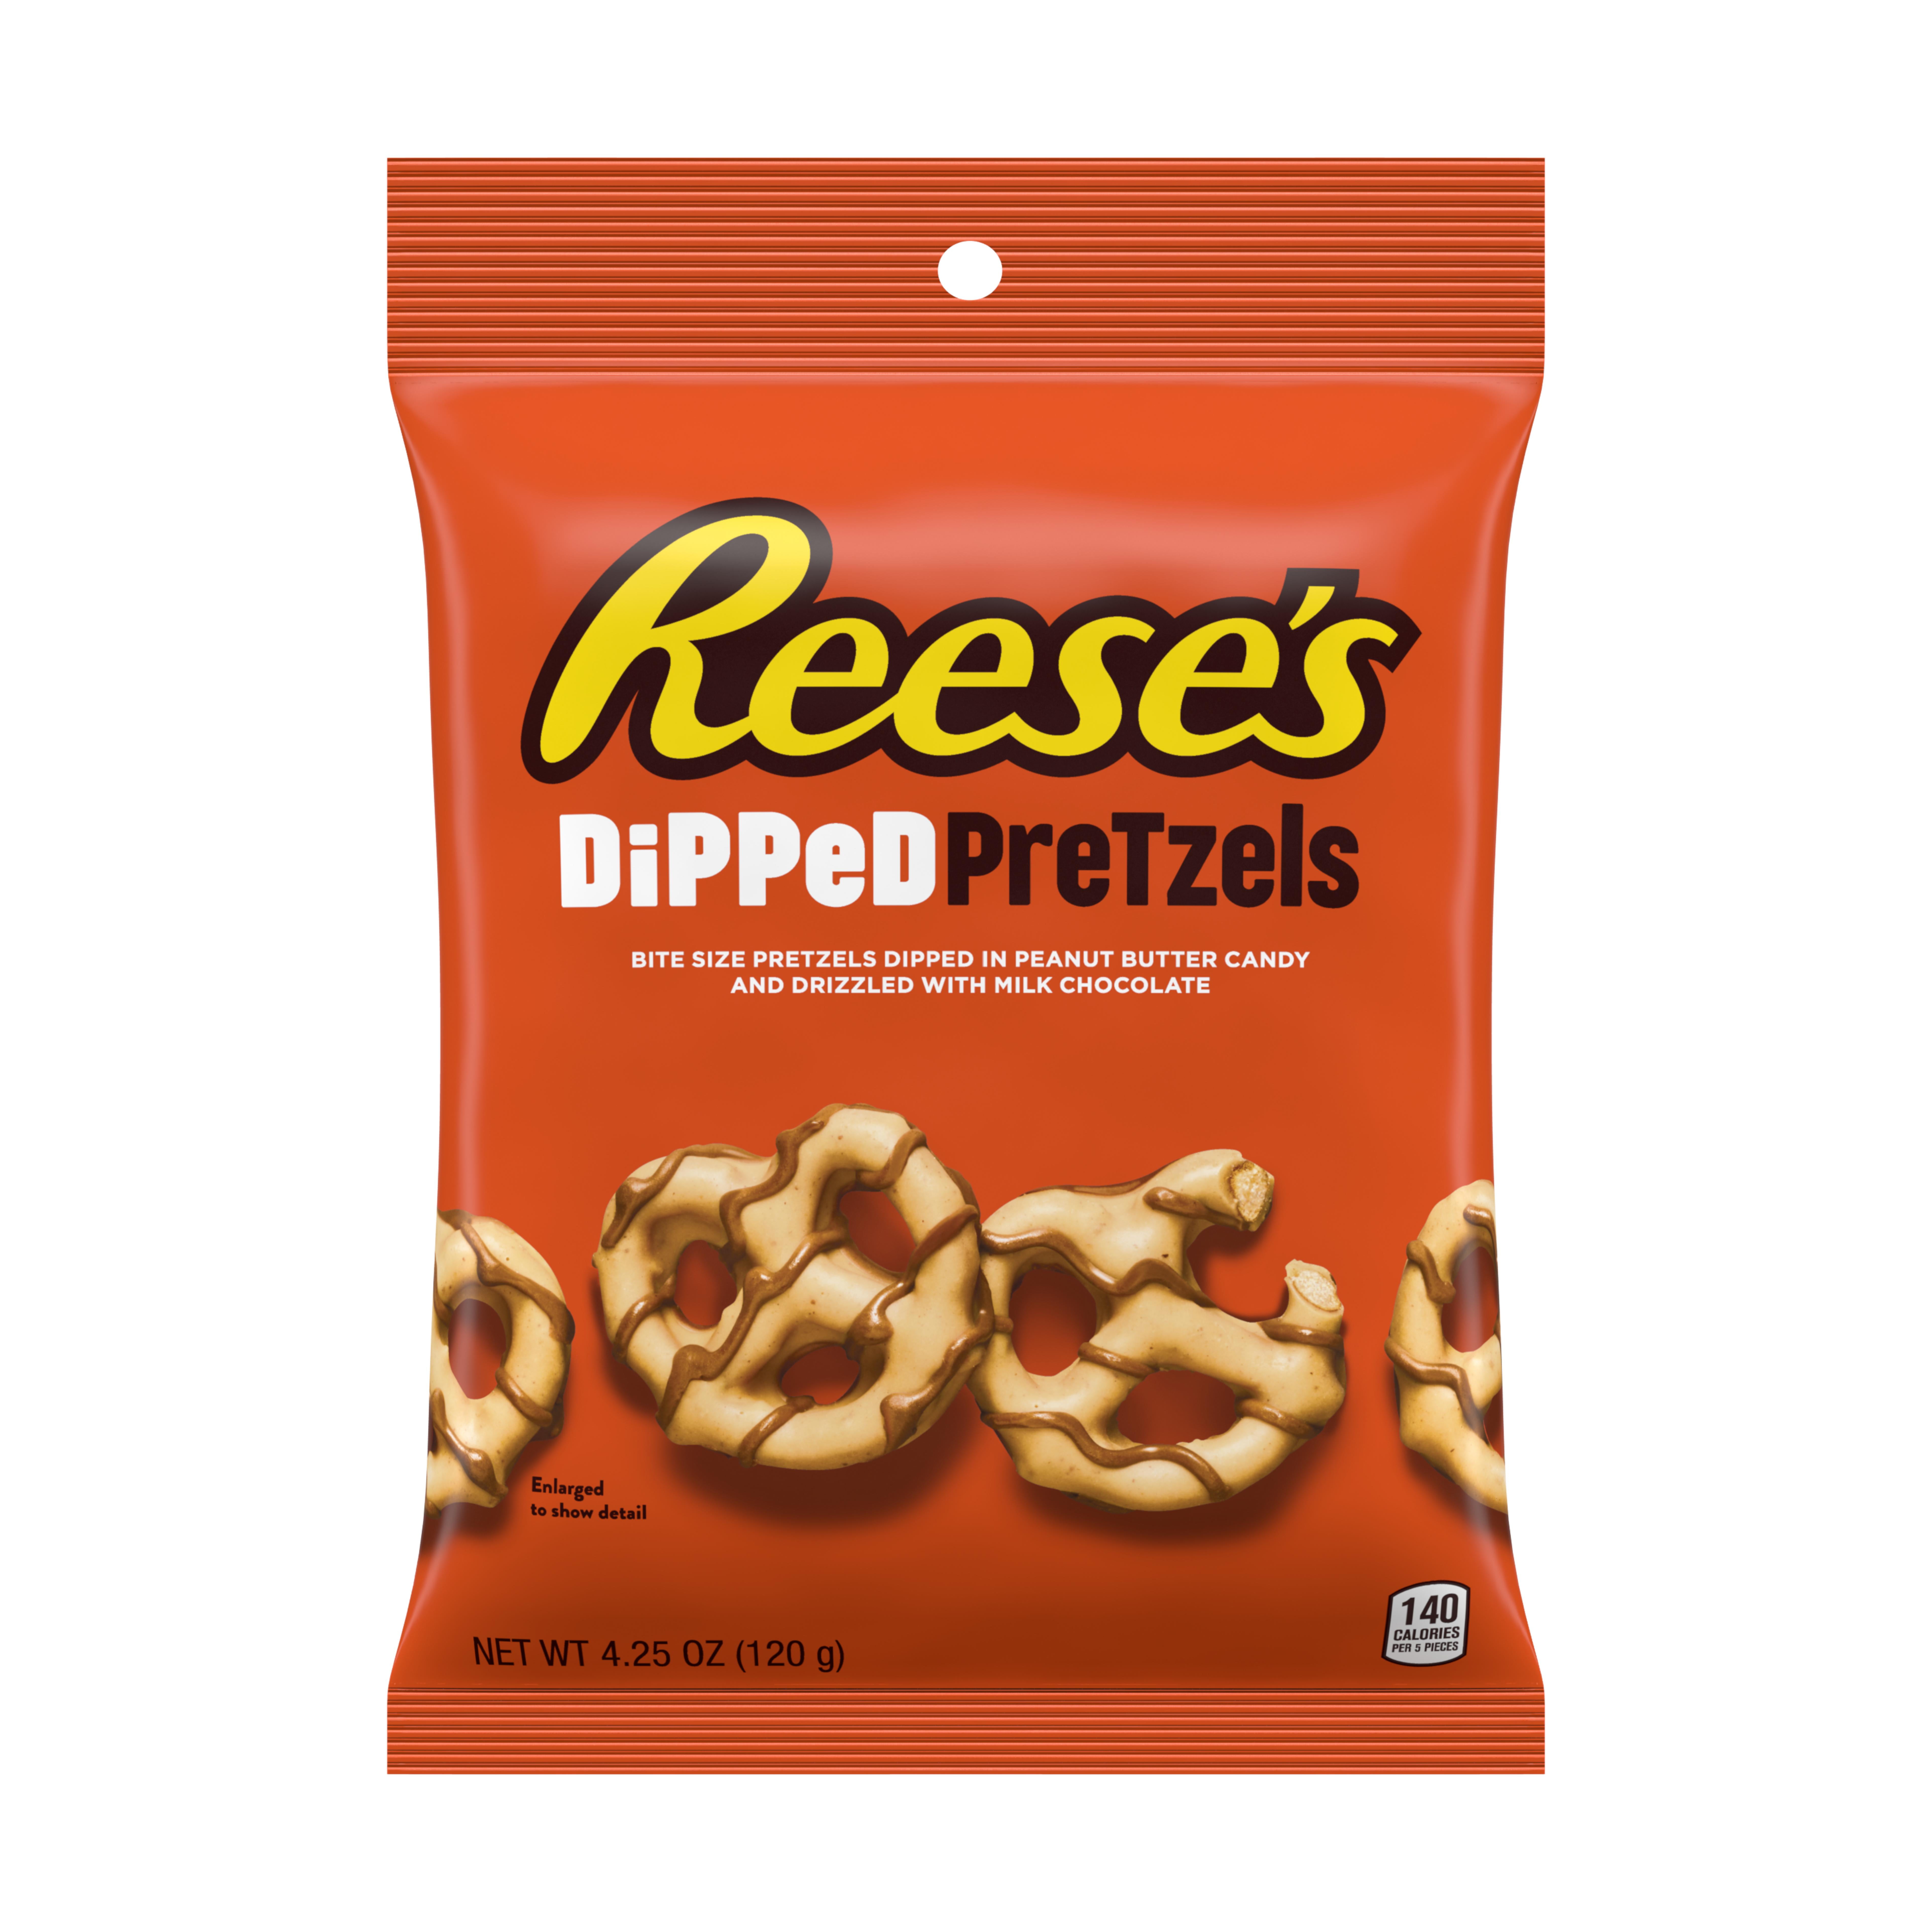 REESE'S Milk Chocolate Peanut Butter Dipped Pretzels, Snack, 4.25 oz, Bag